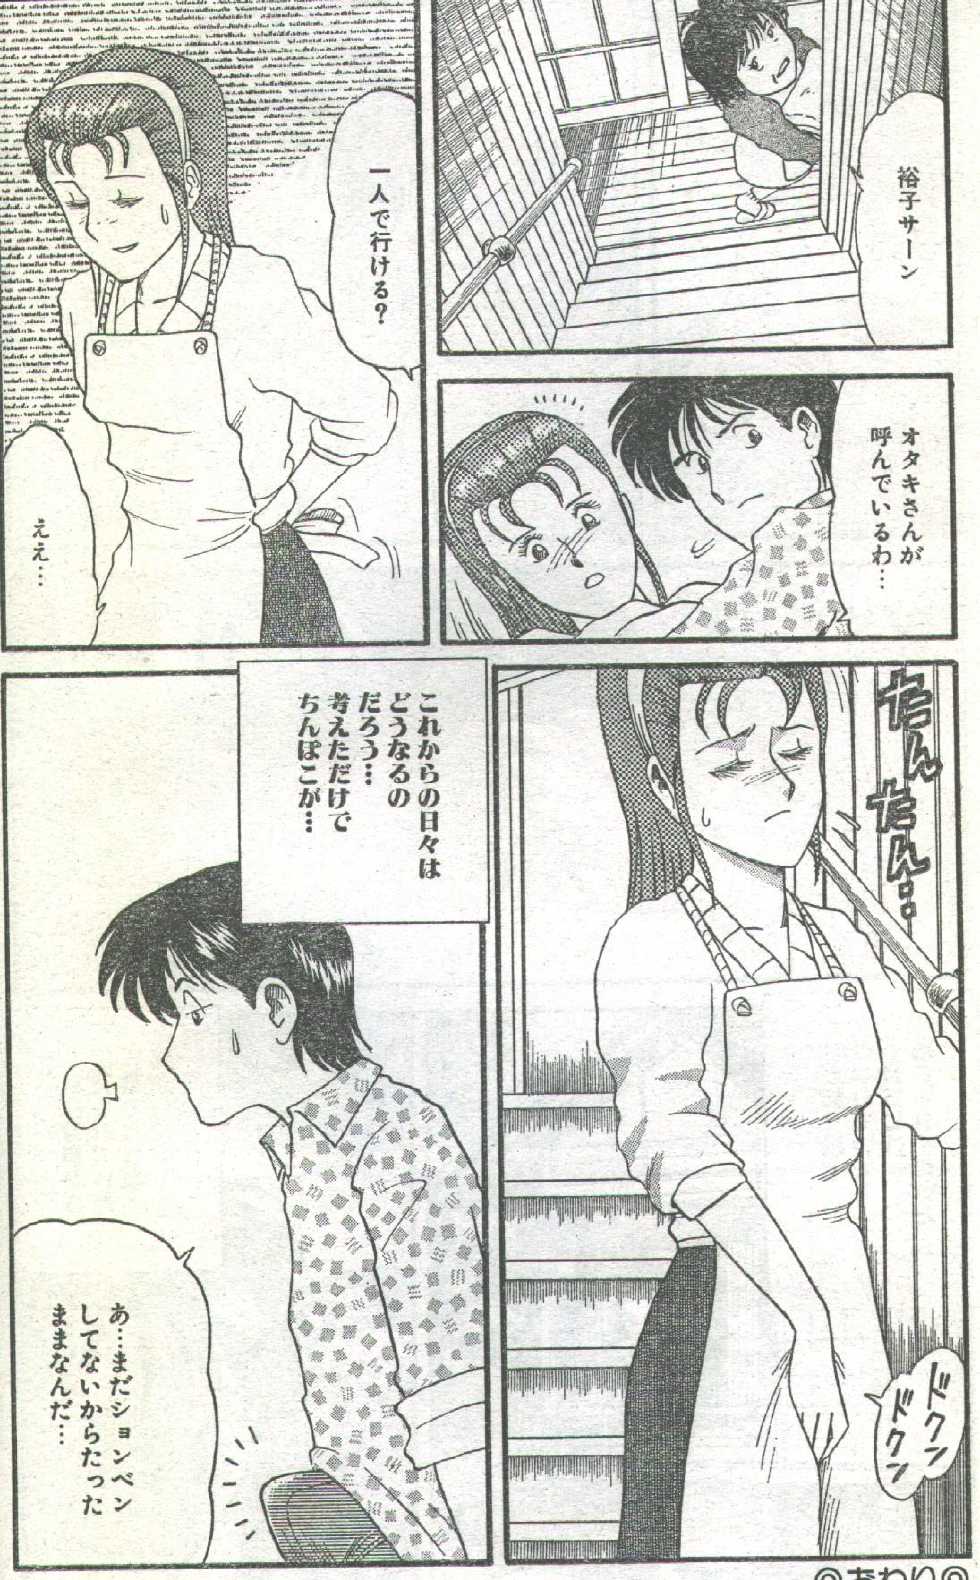 Cotton Comic 1993-02-03 [Incomplete] - Page 18